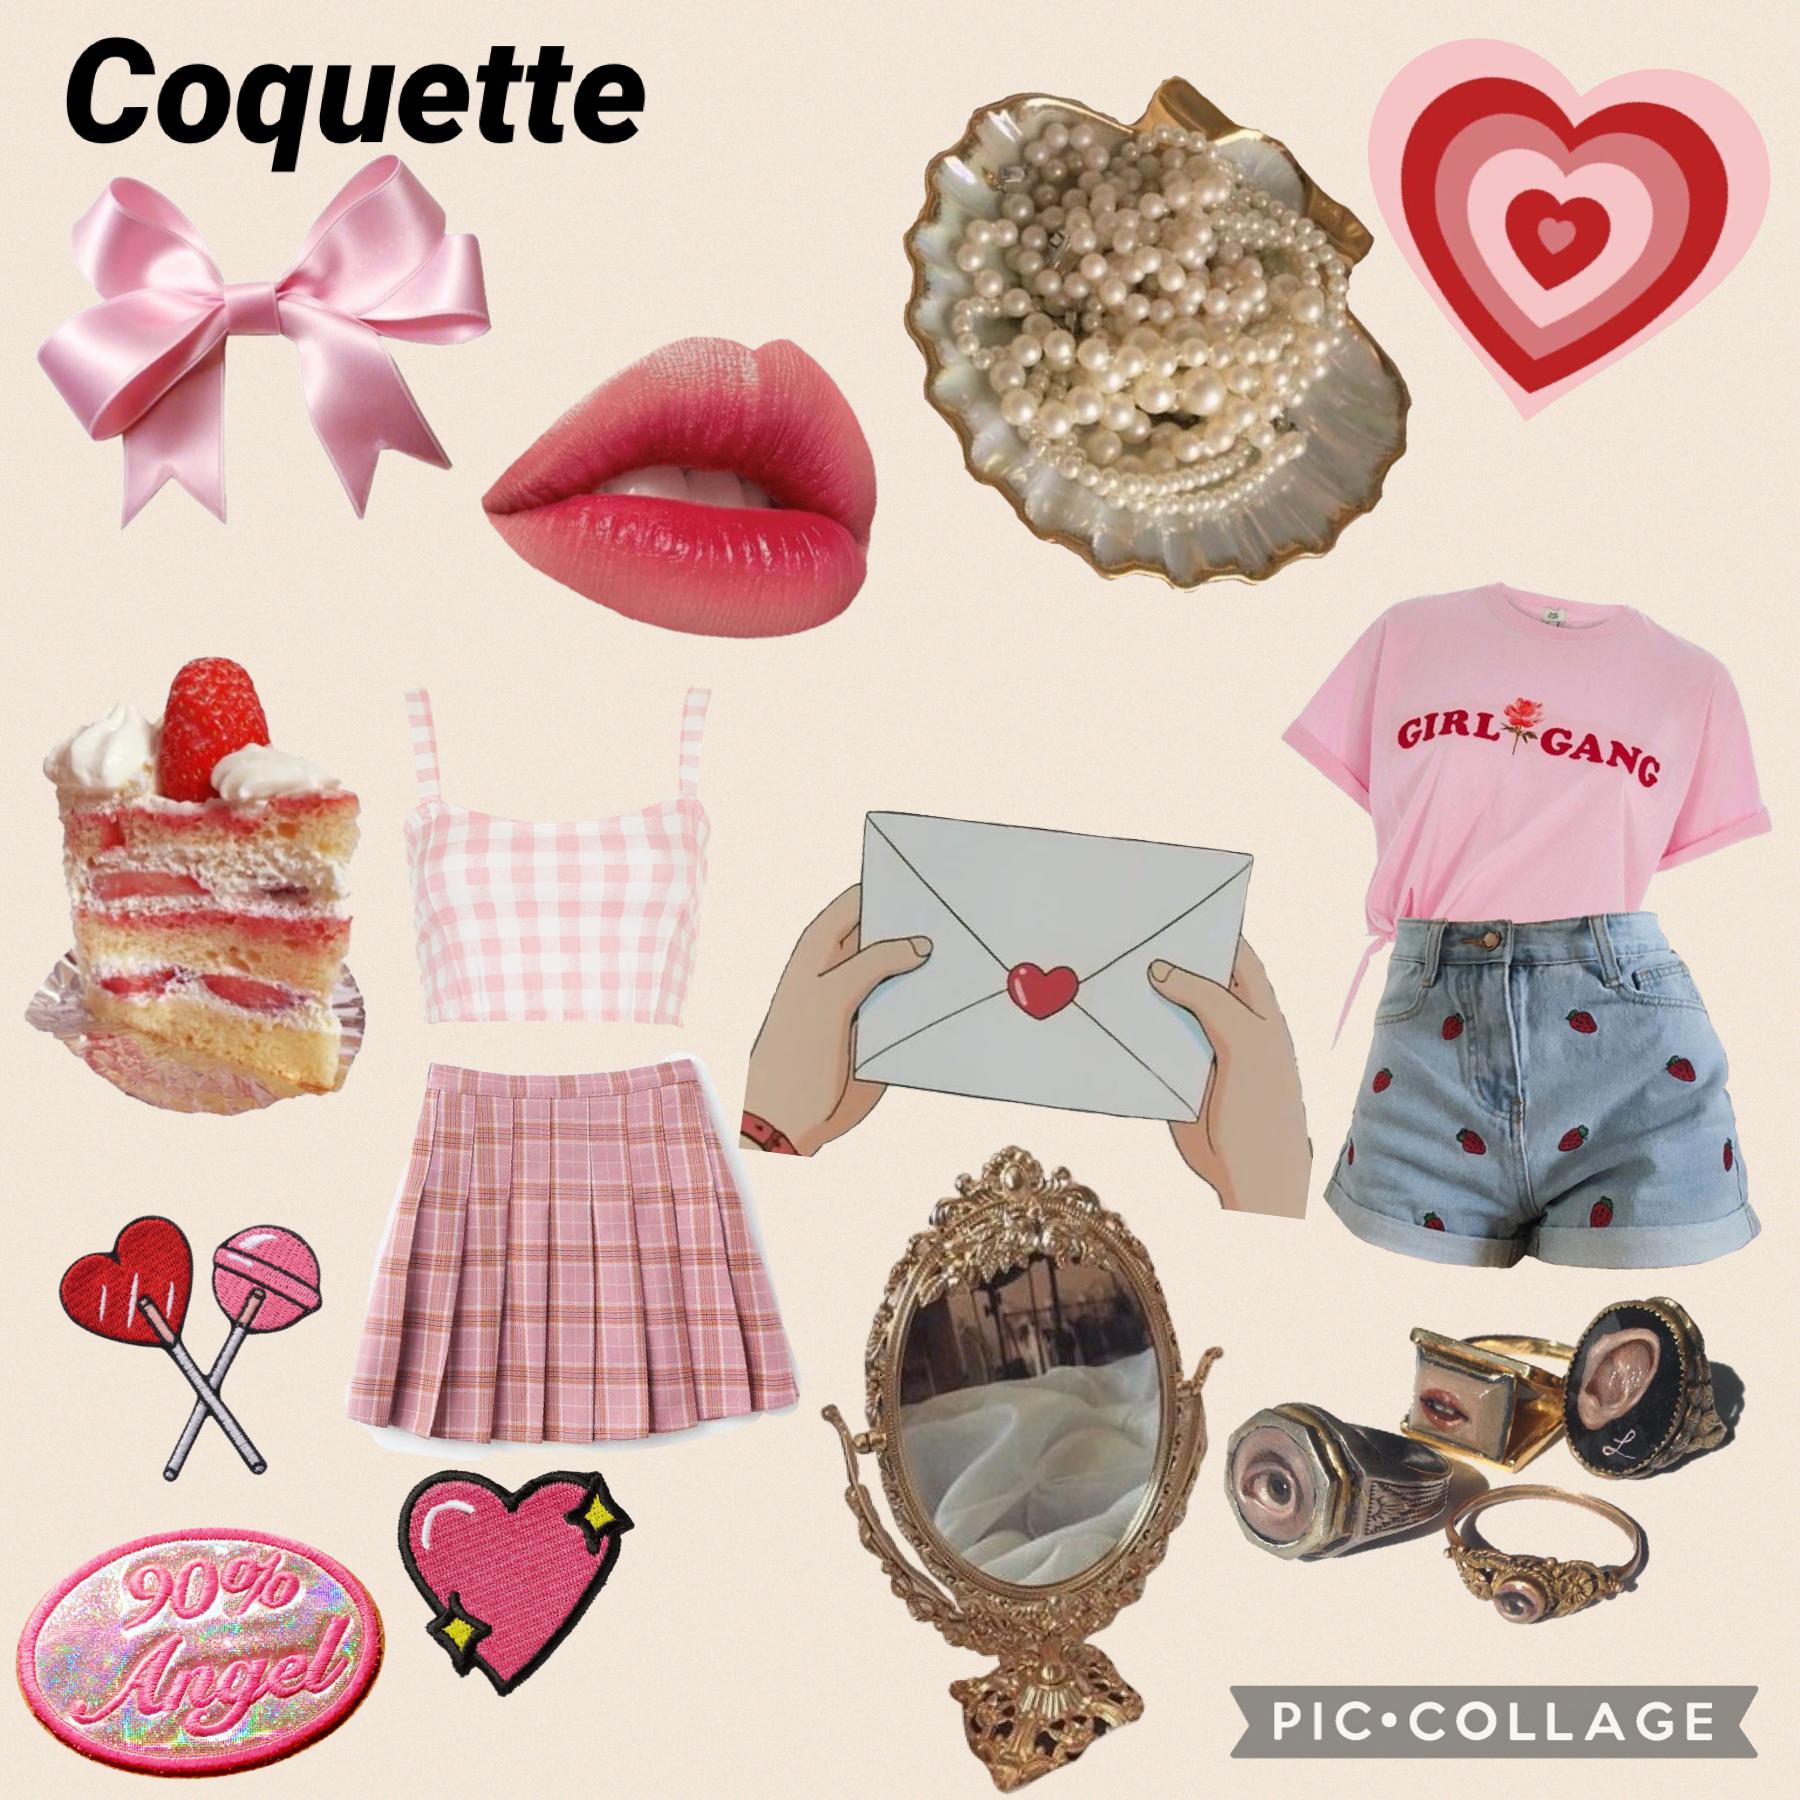 Coquette- requested by another friend 